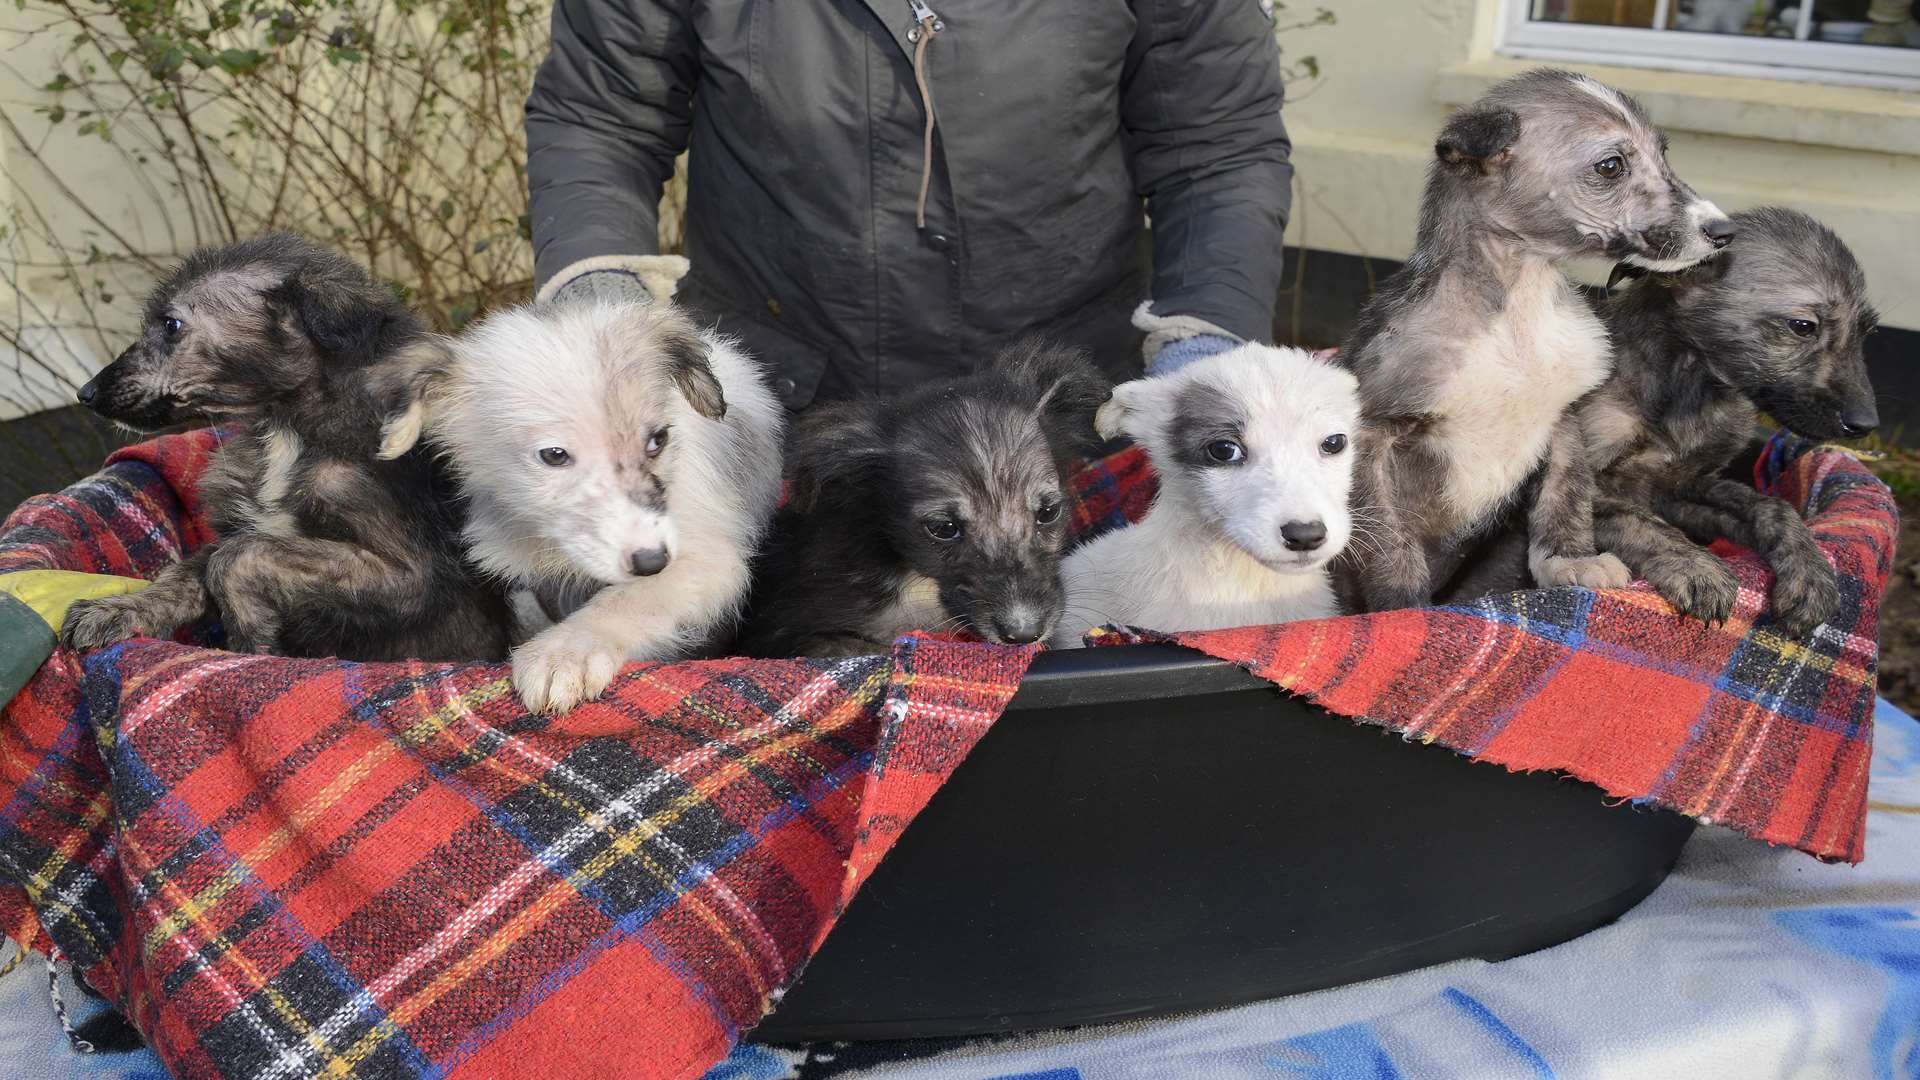 Stelling Minnis Lord Whisky Animal Sanctuary cared for six puppies abandoned in Great Chart